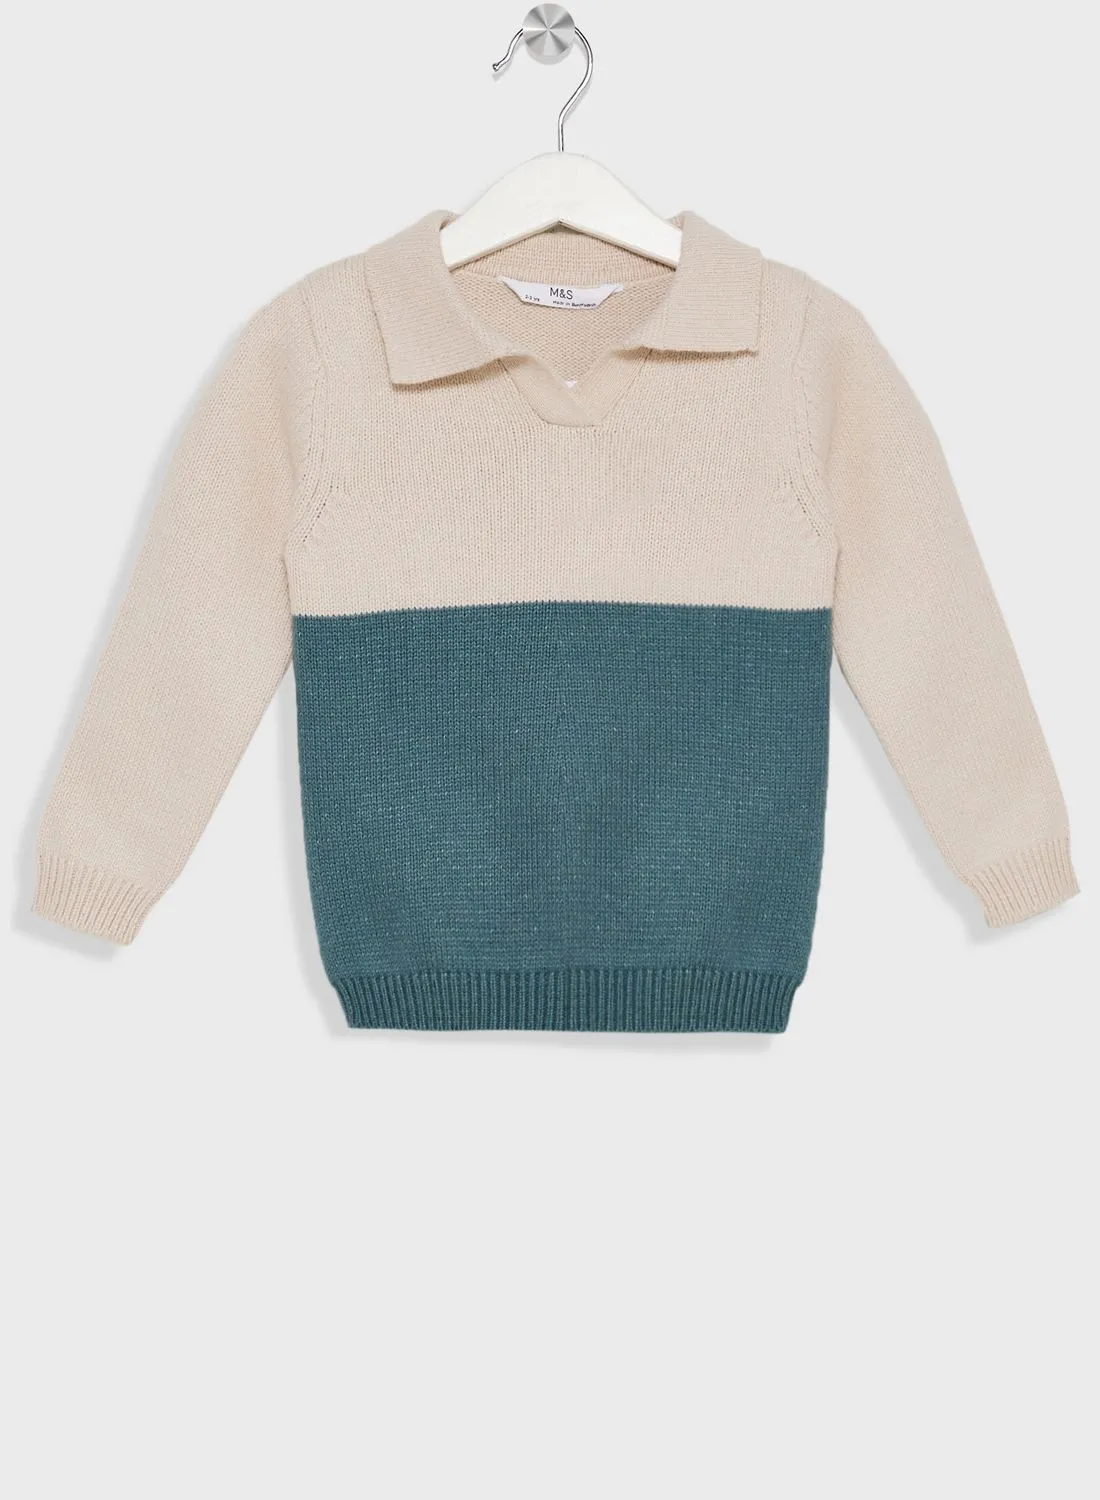 Marks & Spencer Kids Color Block Knitted Sweater